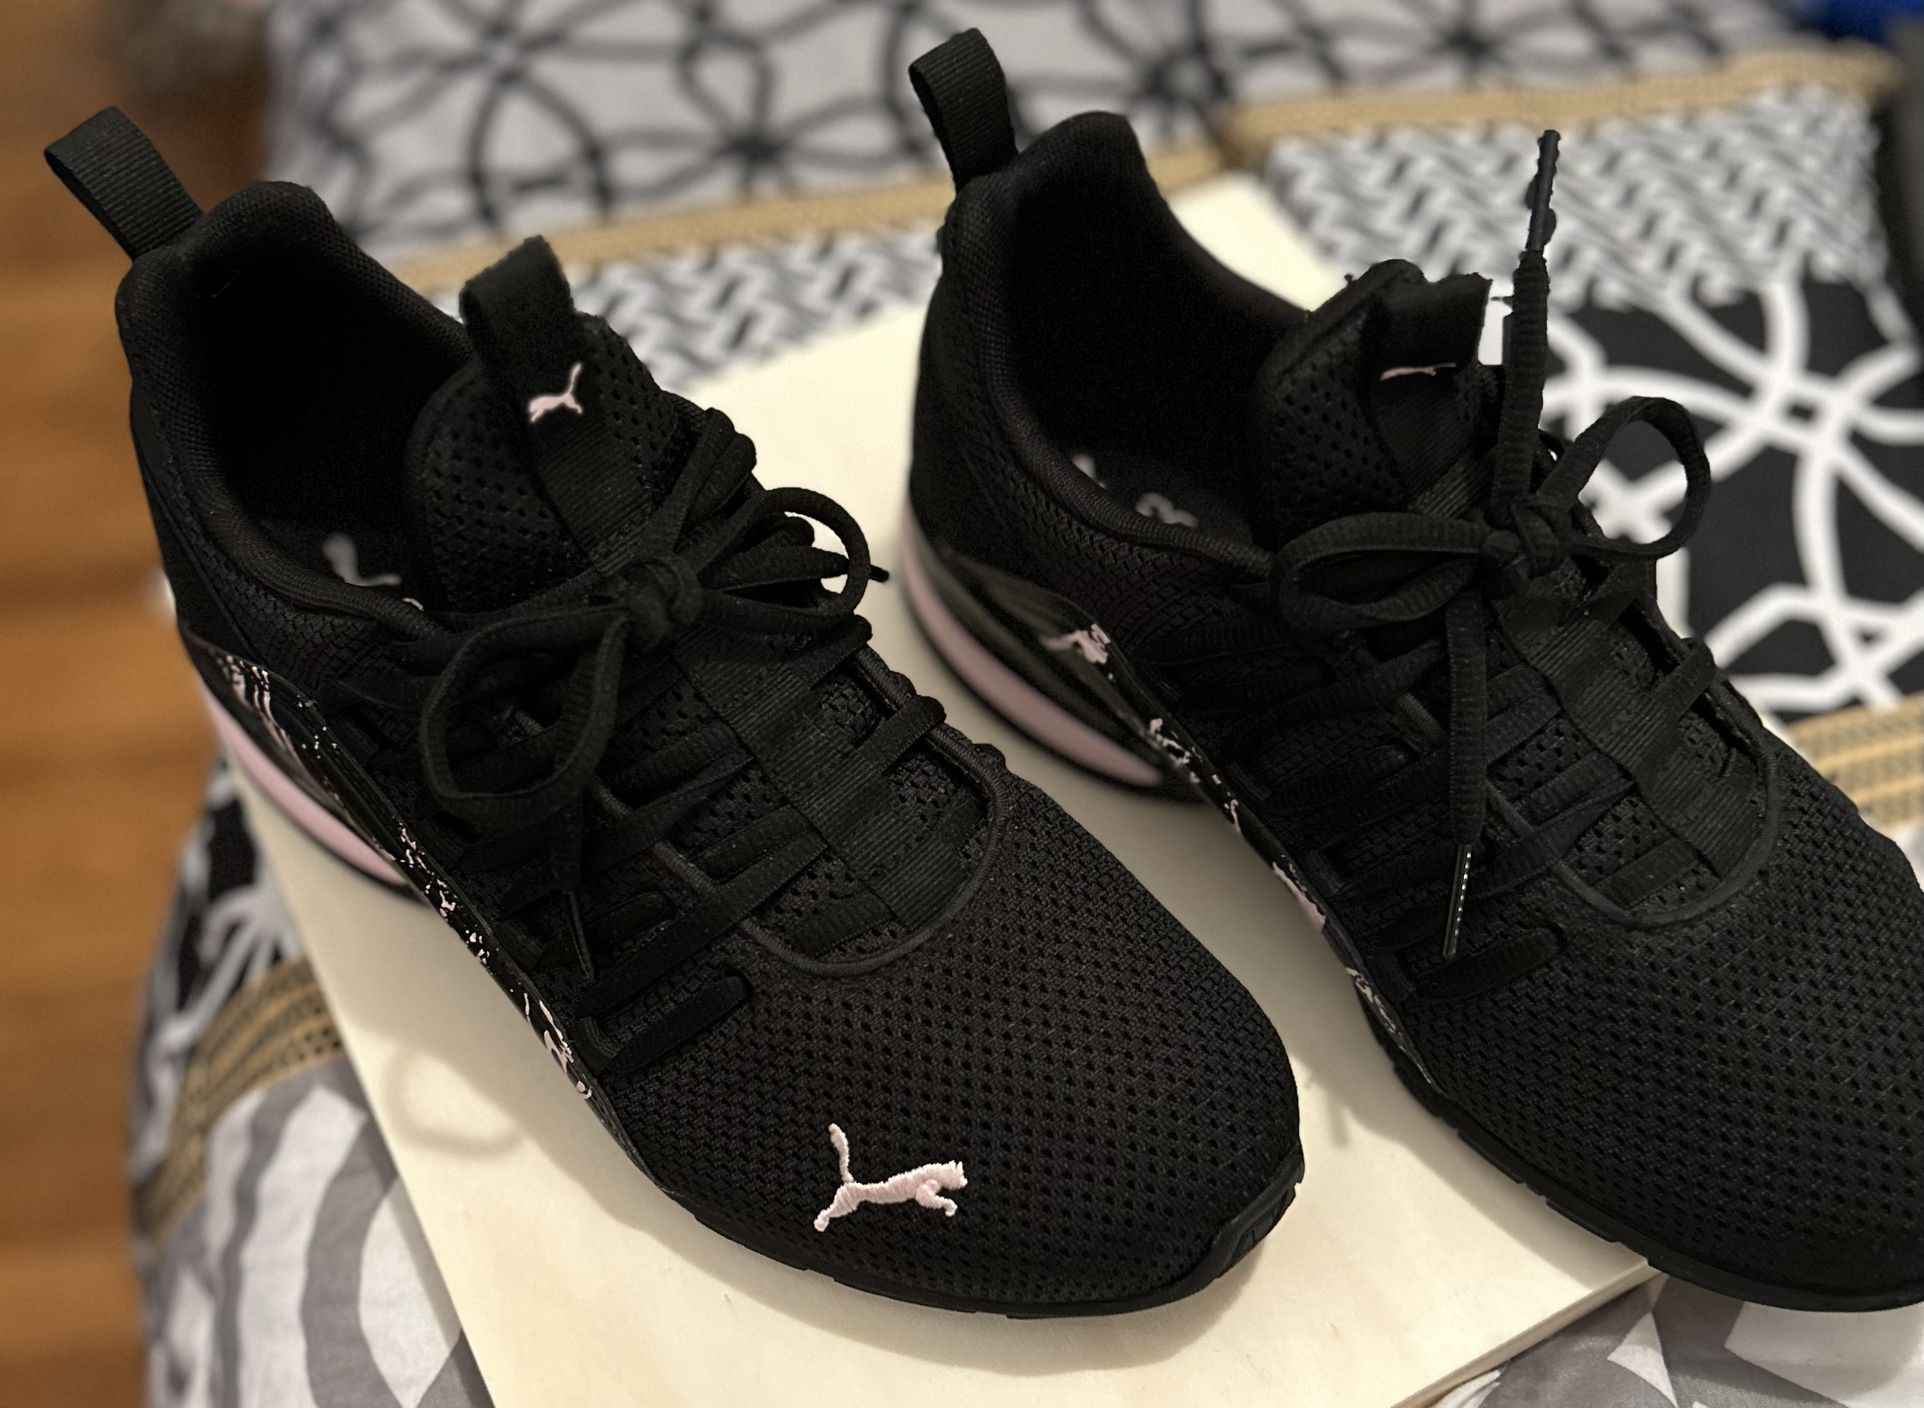 Black And Pink Puma Sneakers/Tennis Shoes 💖